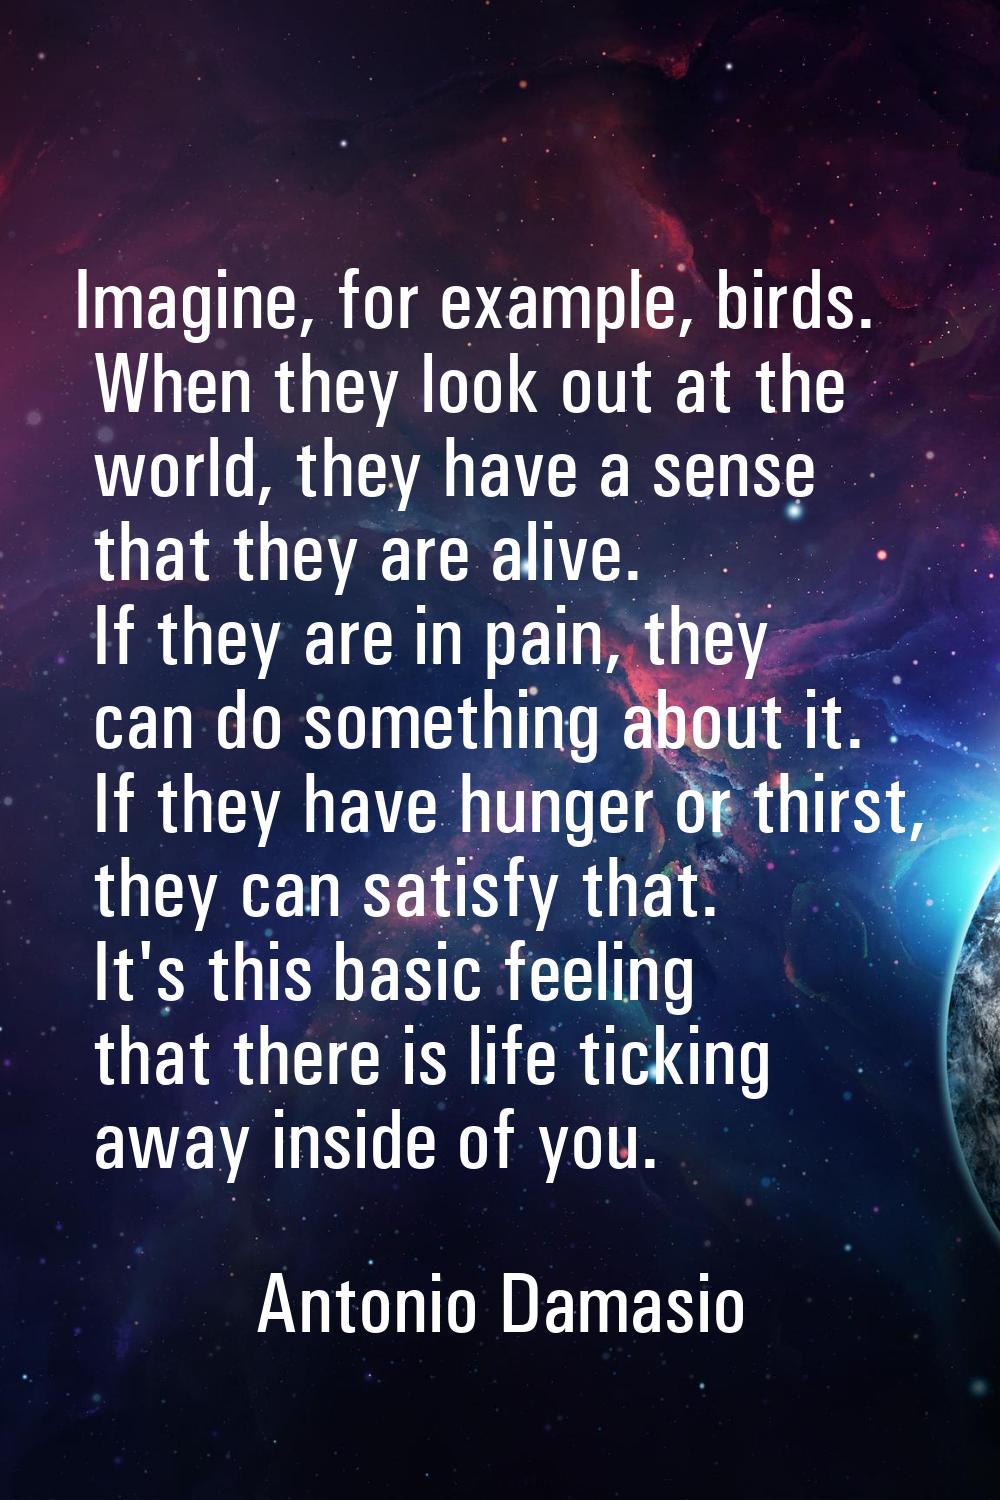 Imagine, for example, birds. When they look out at the world, they have a sense that they are alive